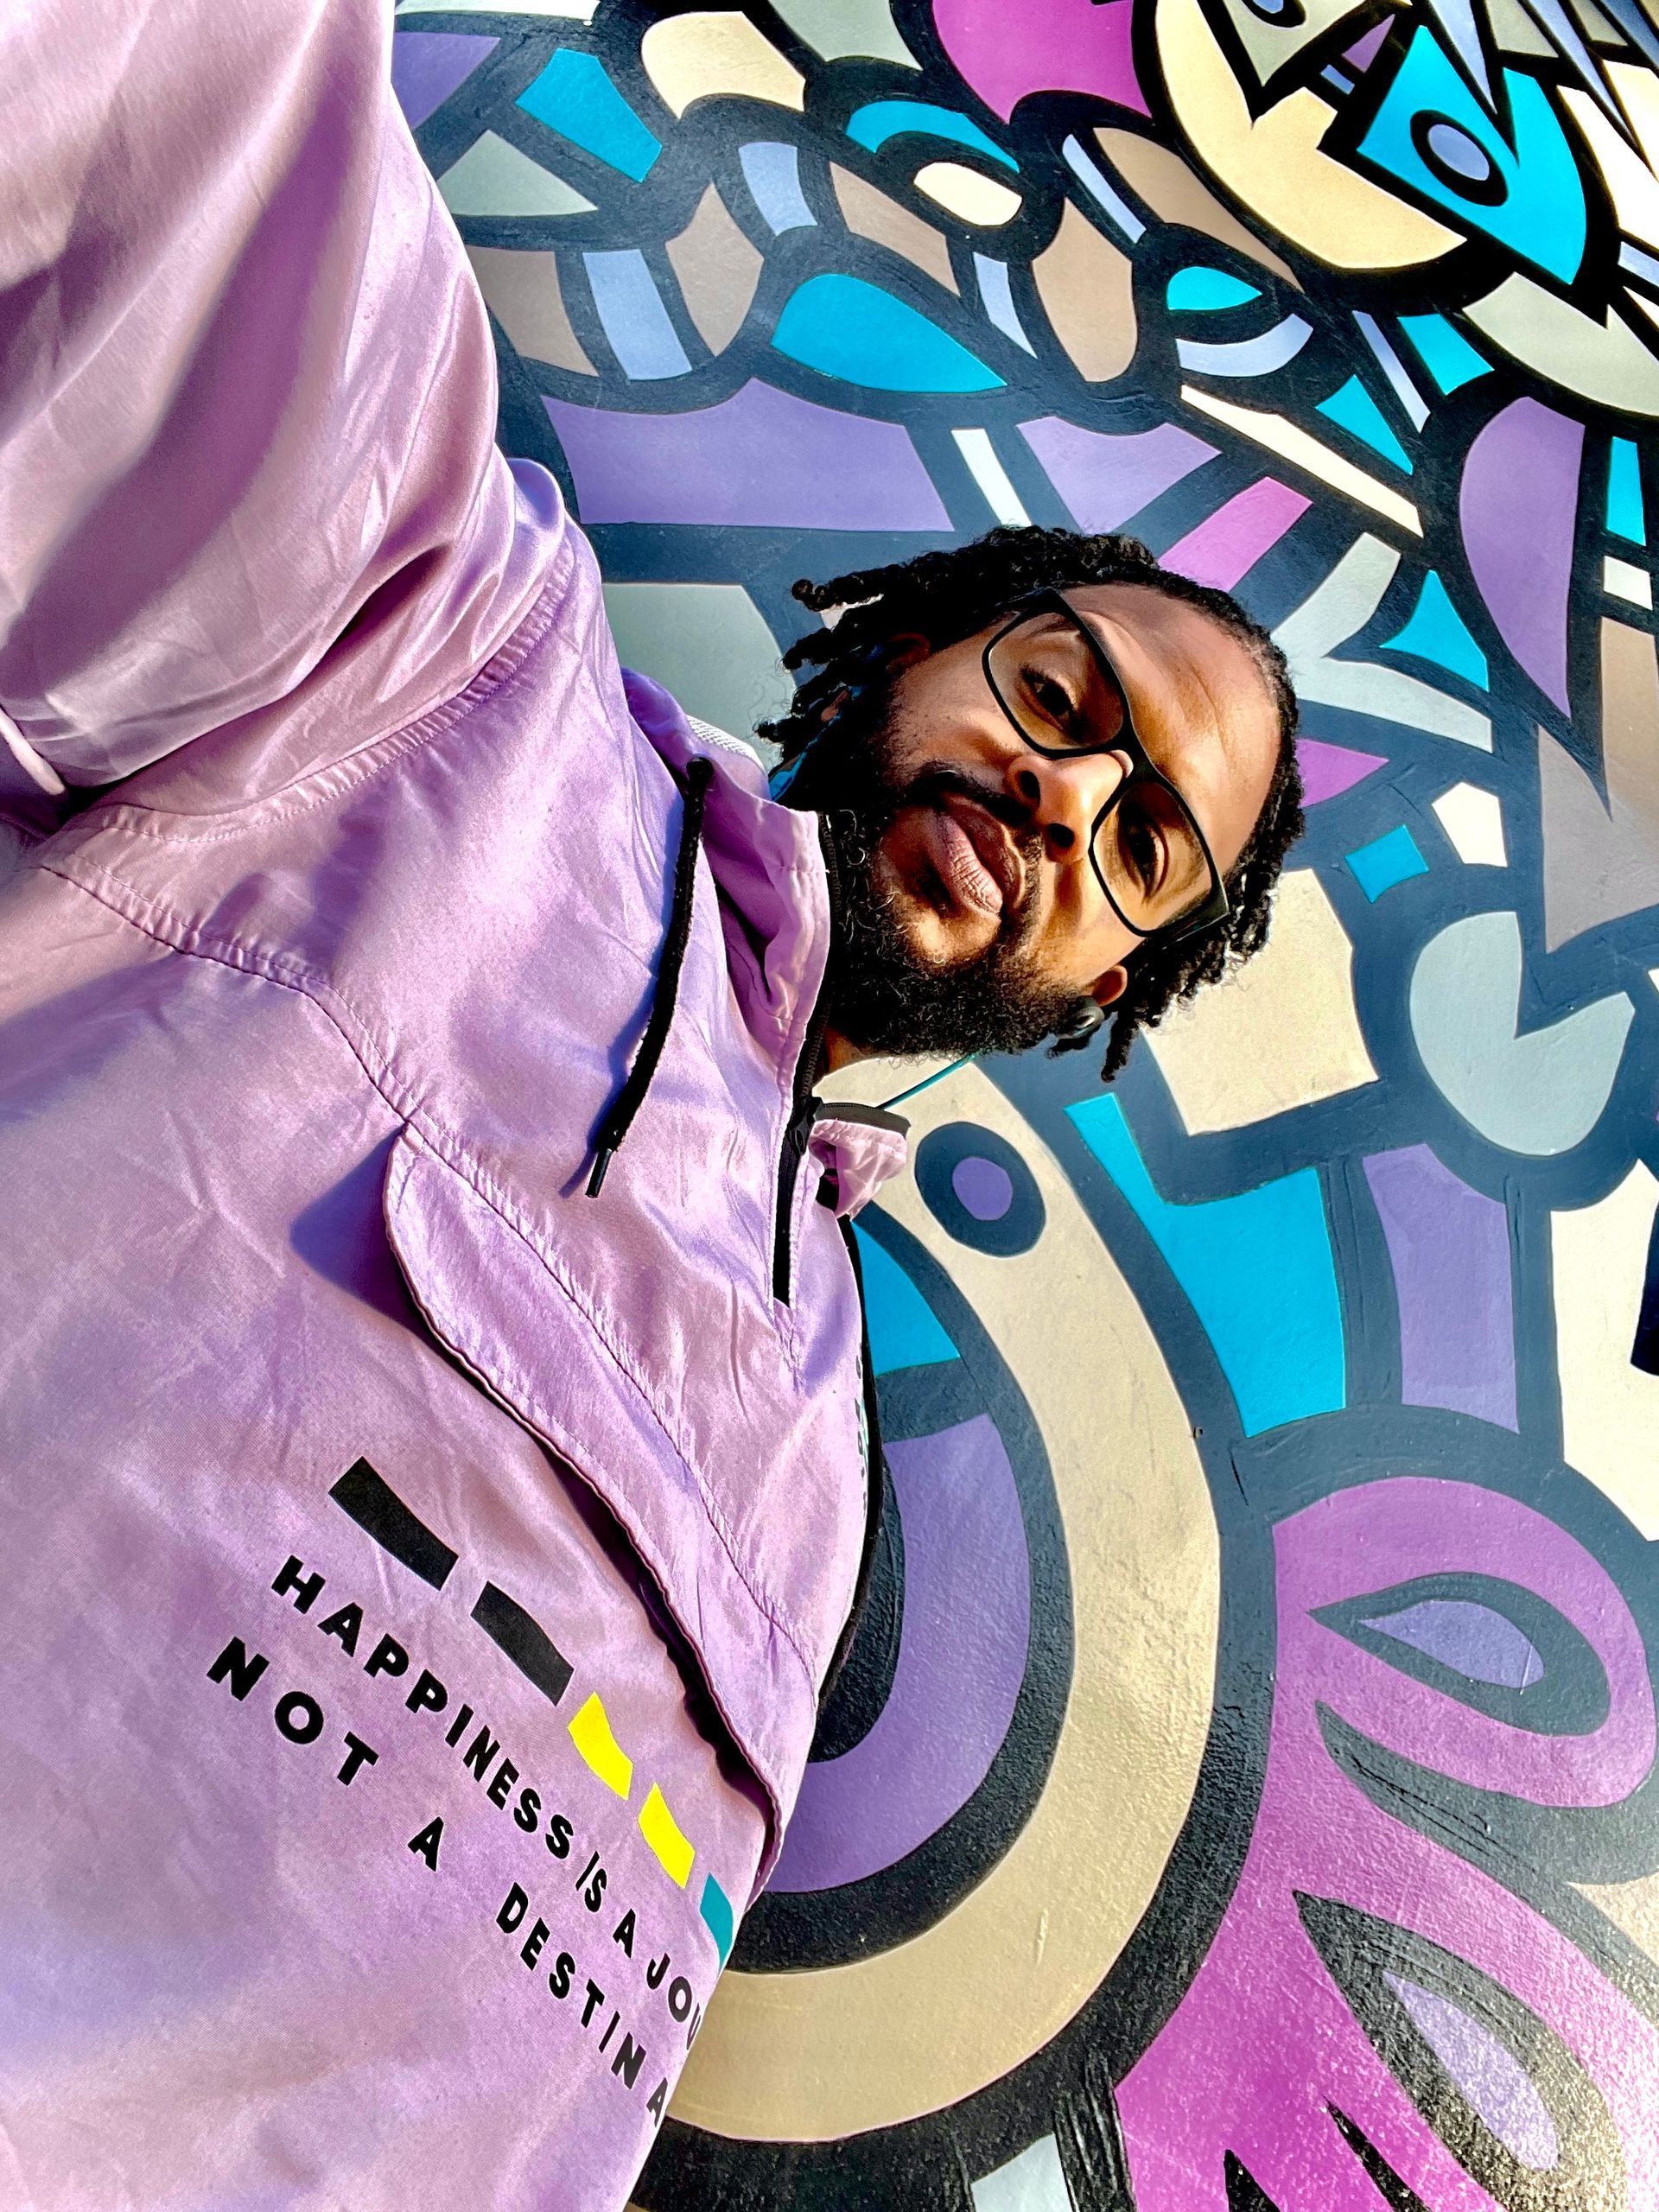 Antjuan wearing glasses and a purple jacket is laying in front of a colorful wall